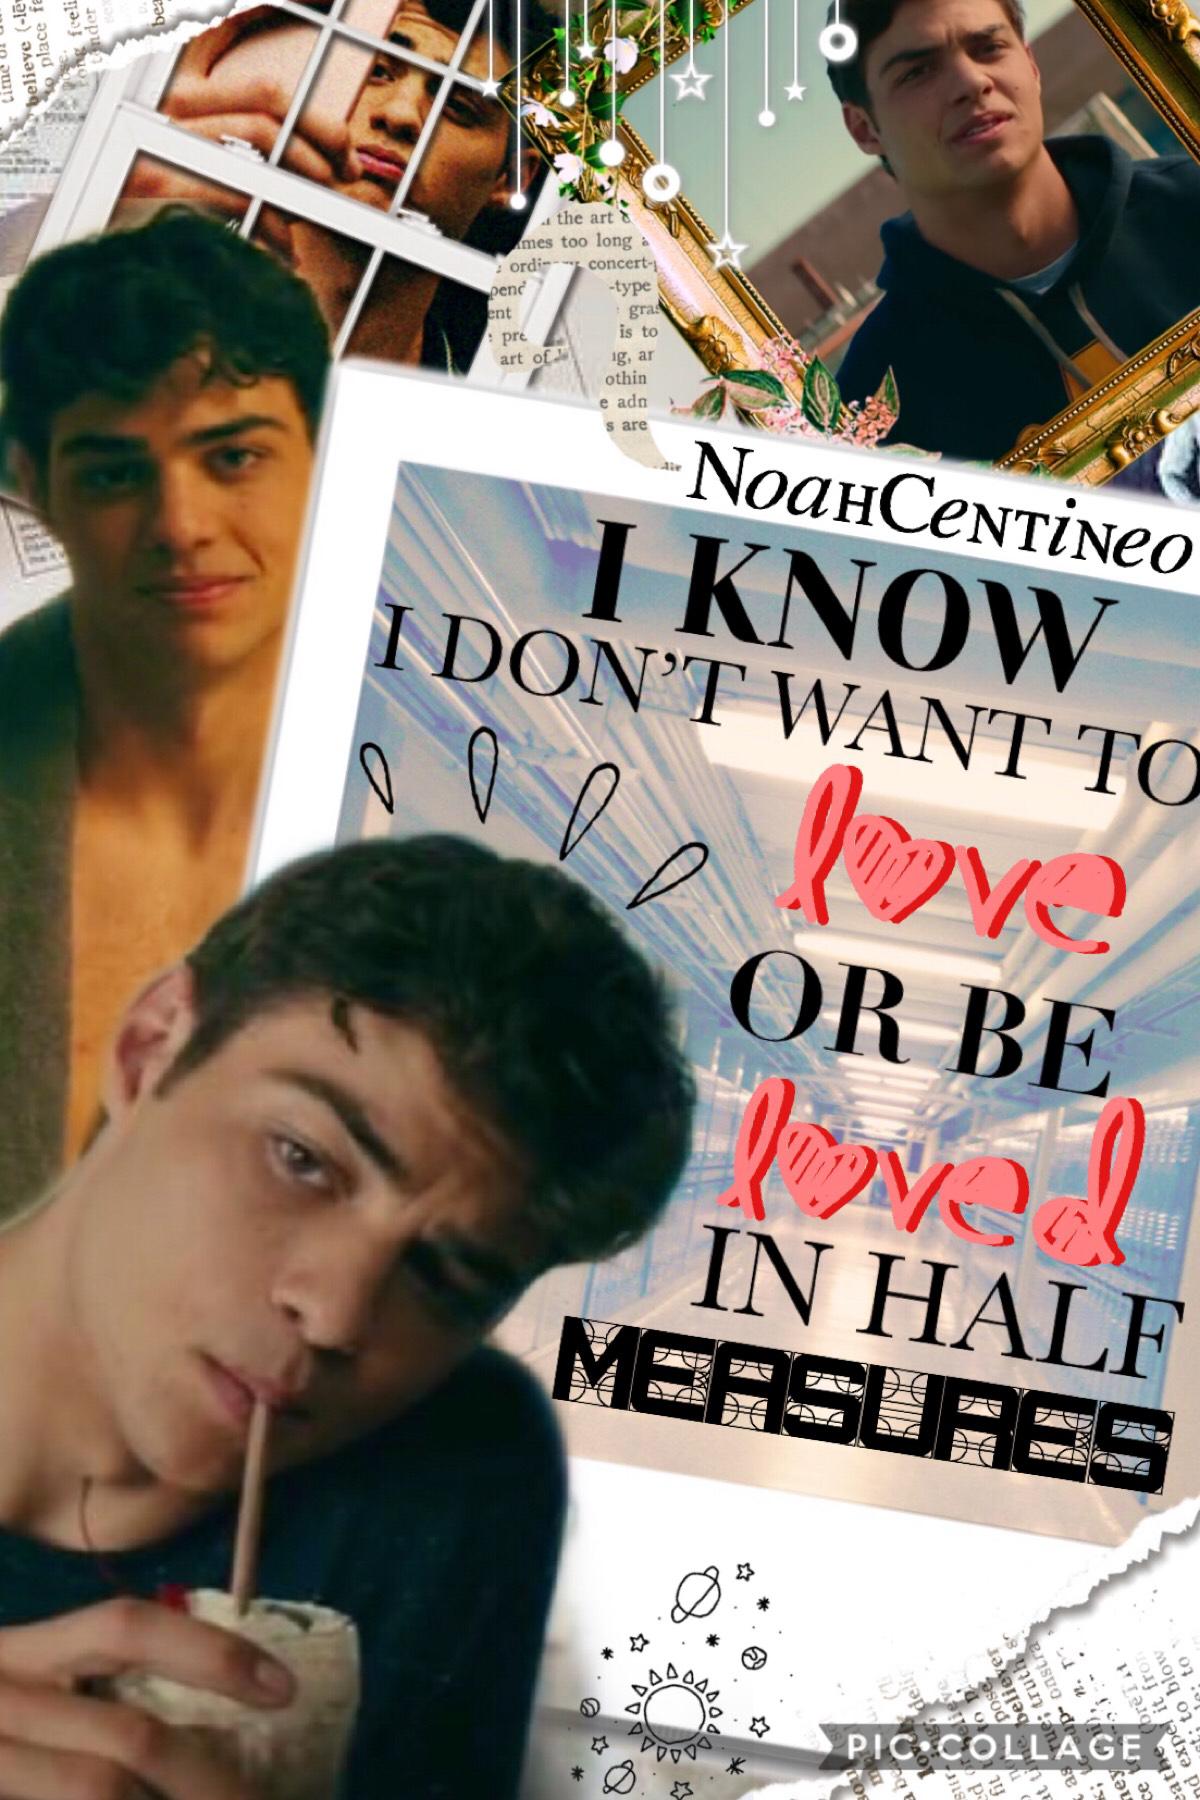 📔TaP📔

Hey! Hope you like my take on like a Peter Kavinsky edit (not loving it) 

QOTD: PB&J🥪 Grilled Cheese 🧀?

AOTD: Grilled Cheese 🧀 